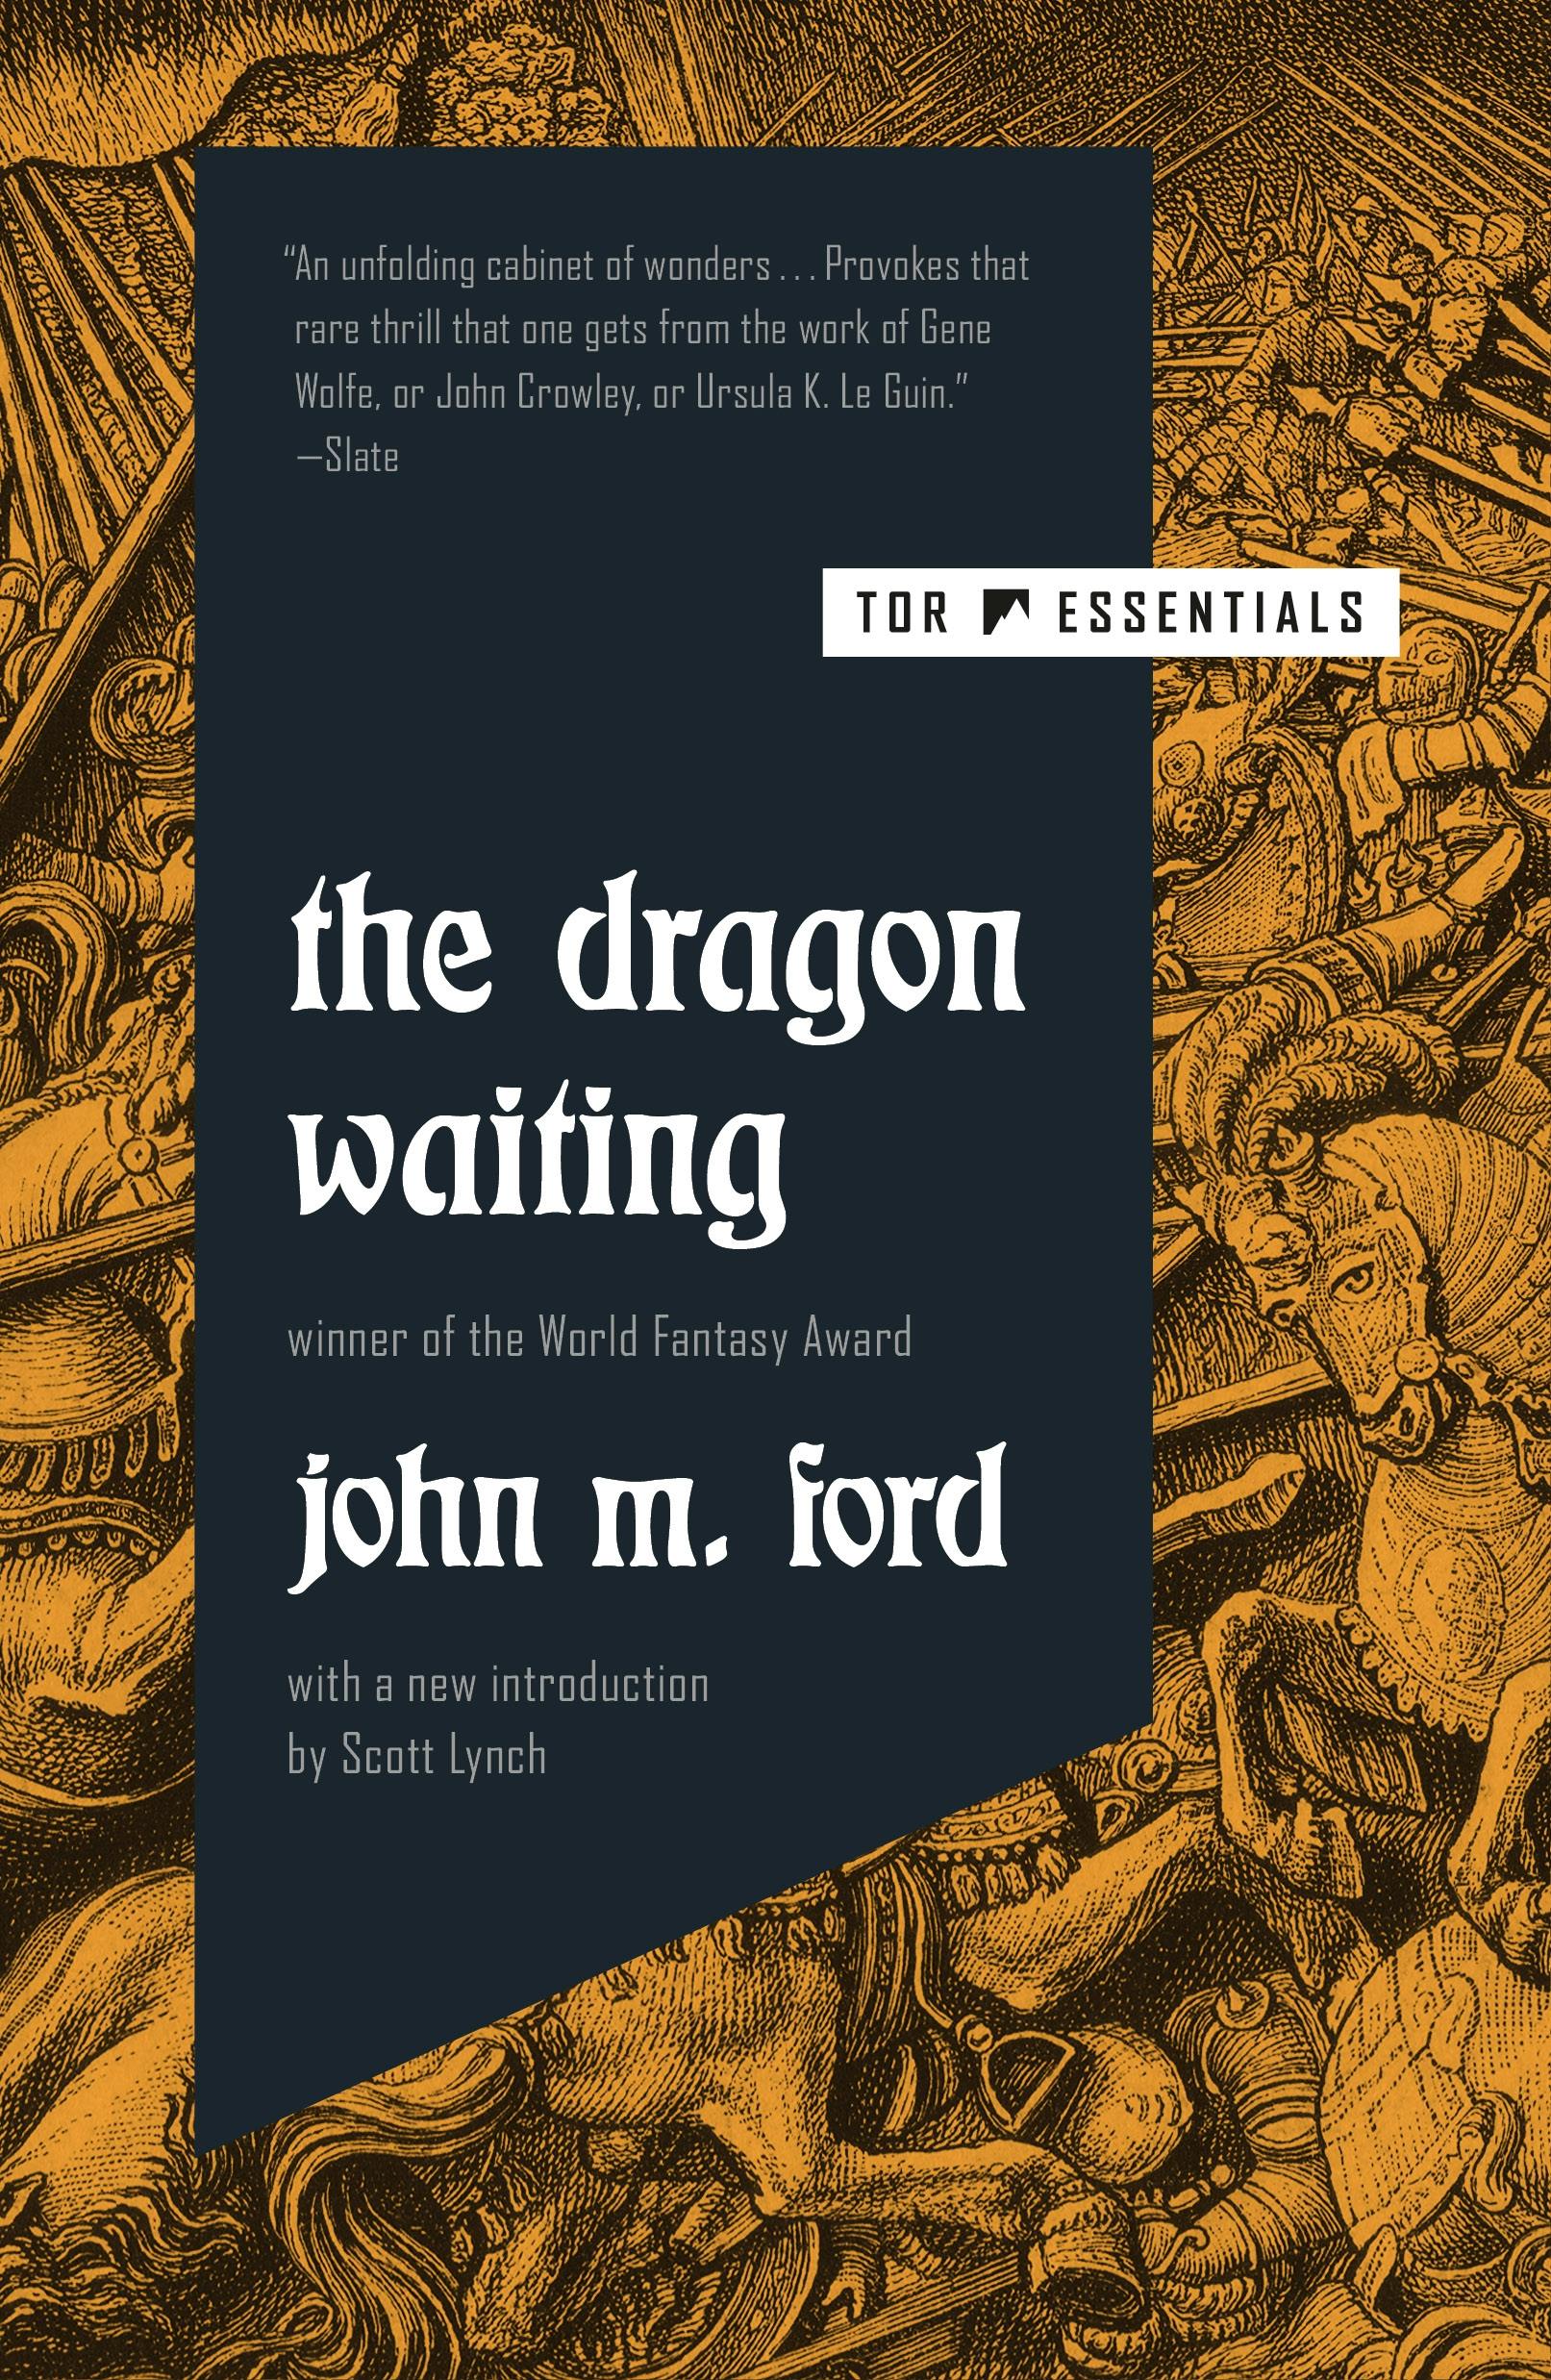 Cover for the book titled as: The Dragon Waiting